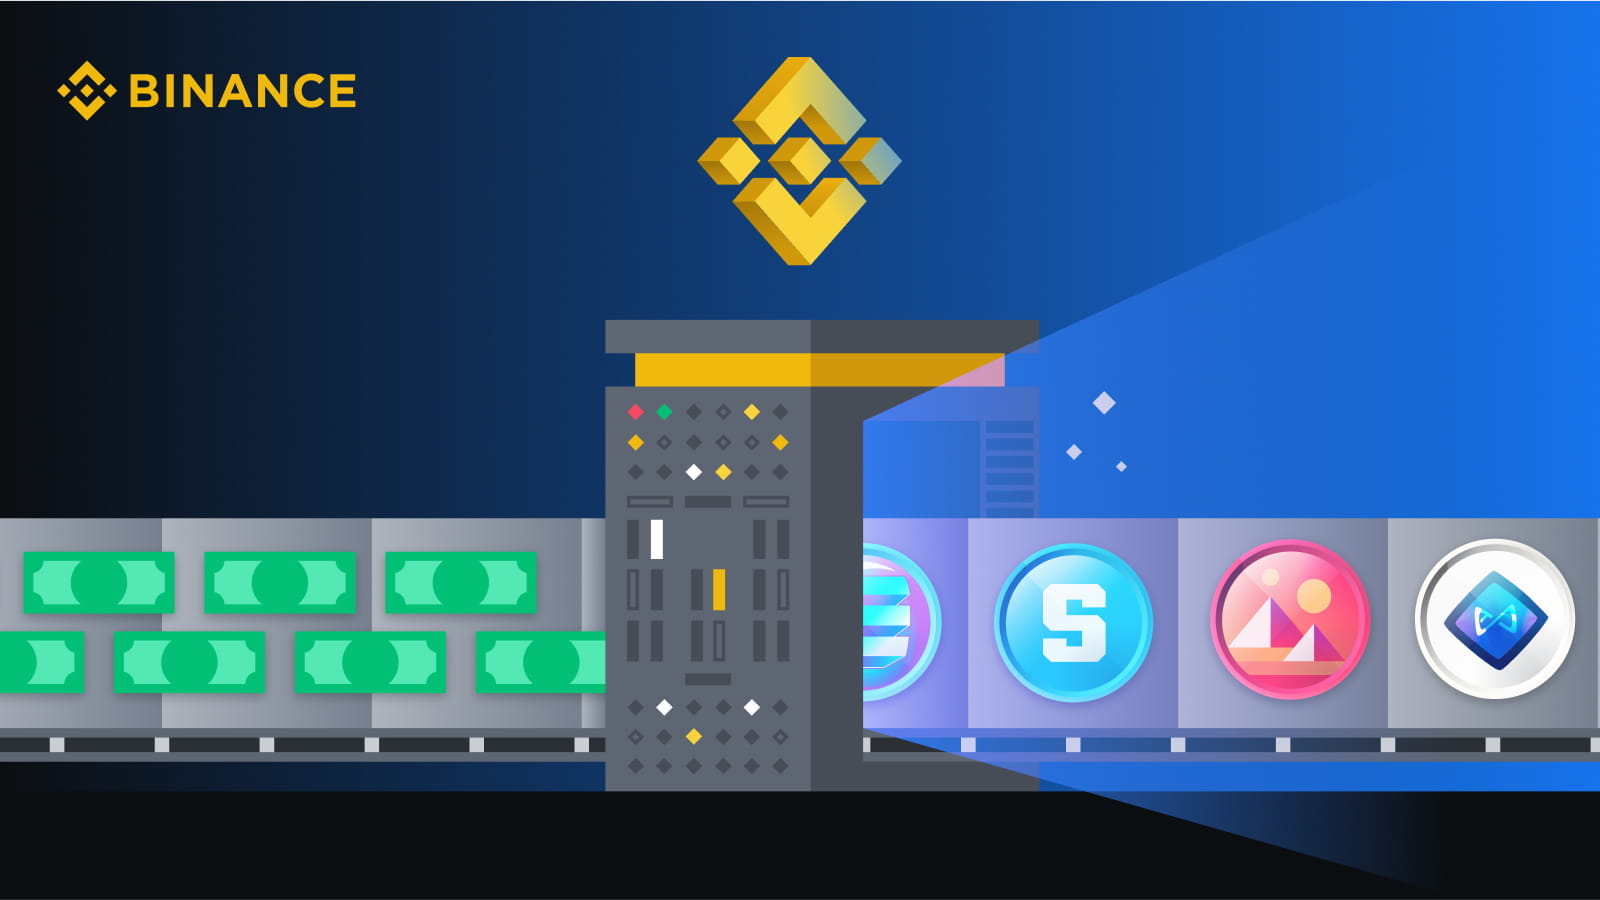 Cryptocurrencies depreciate, Binance sets up an investment fund in web 3.0 - Photo 2.